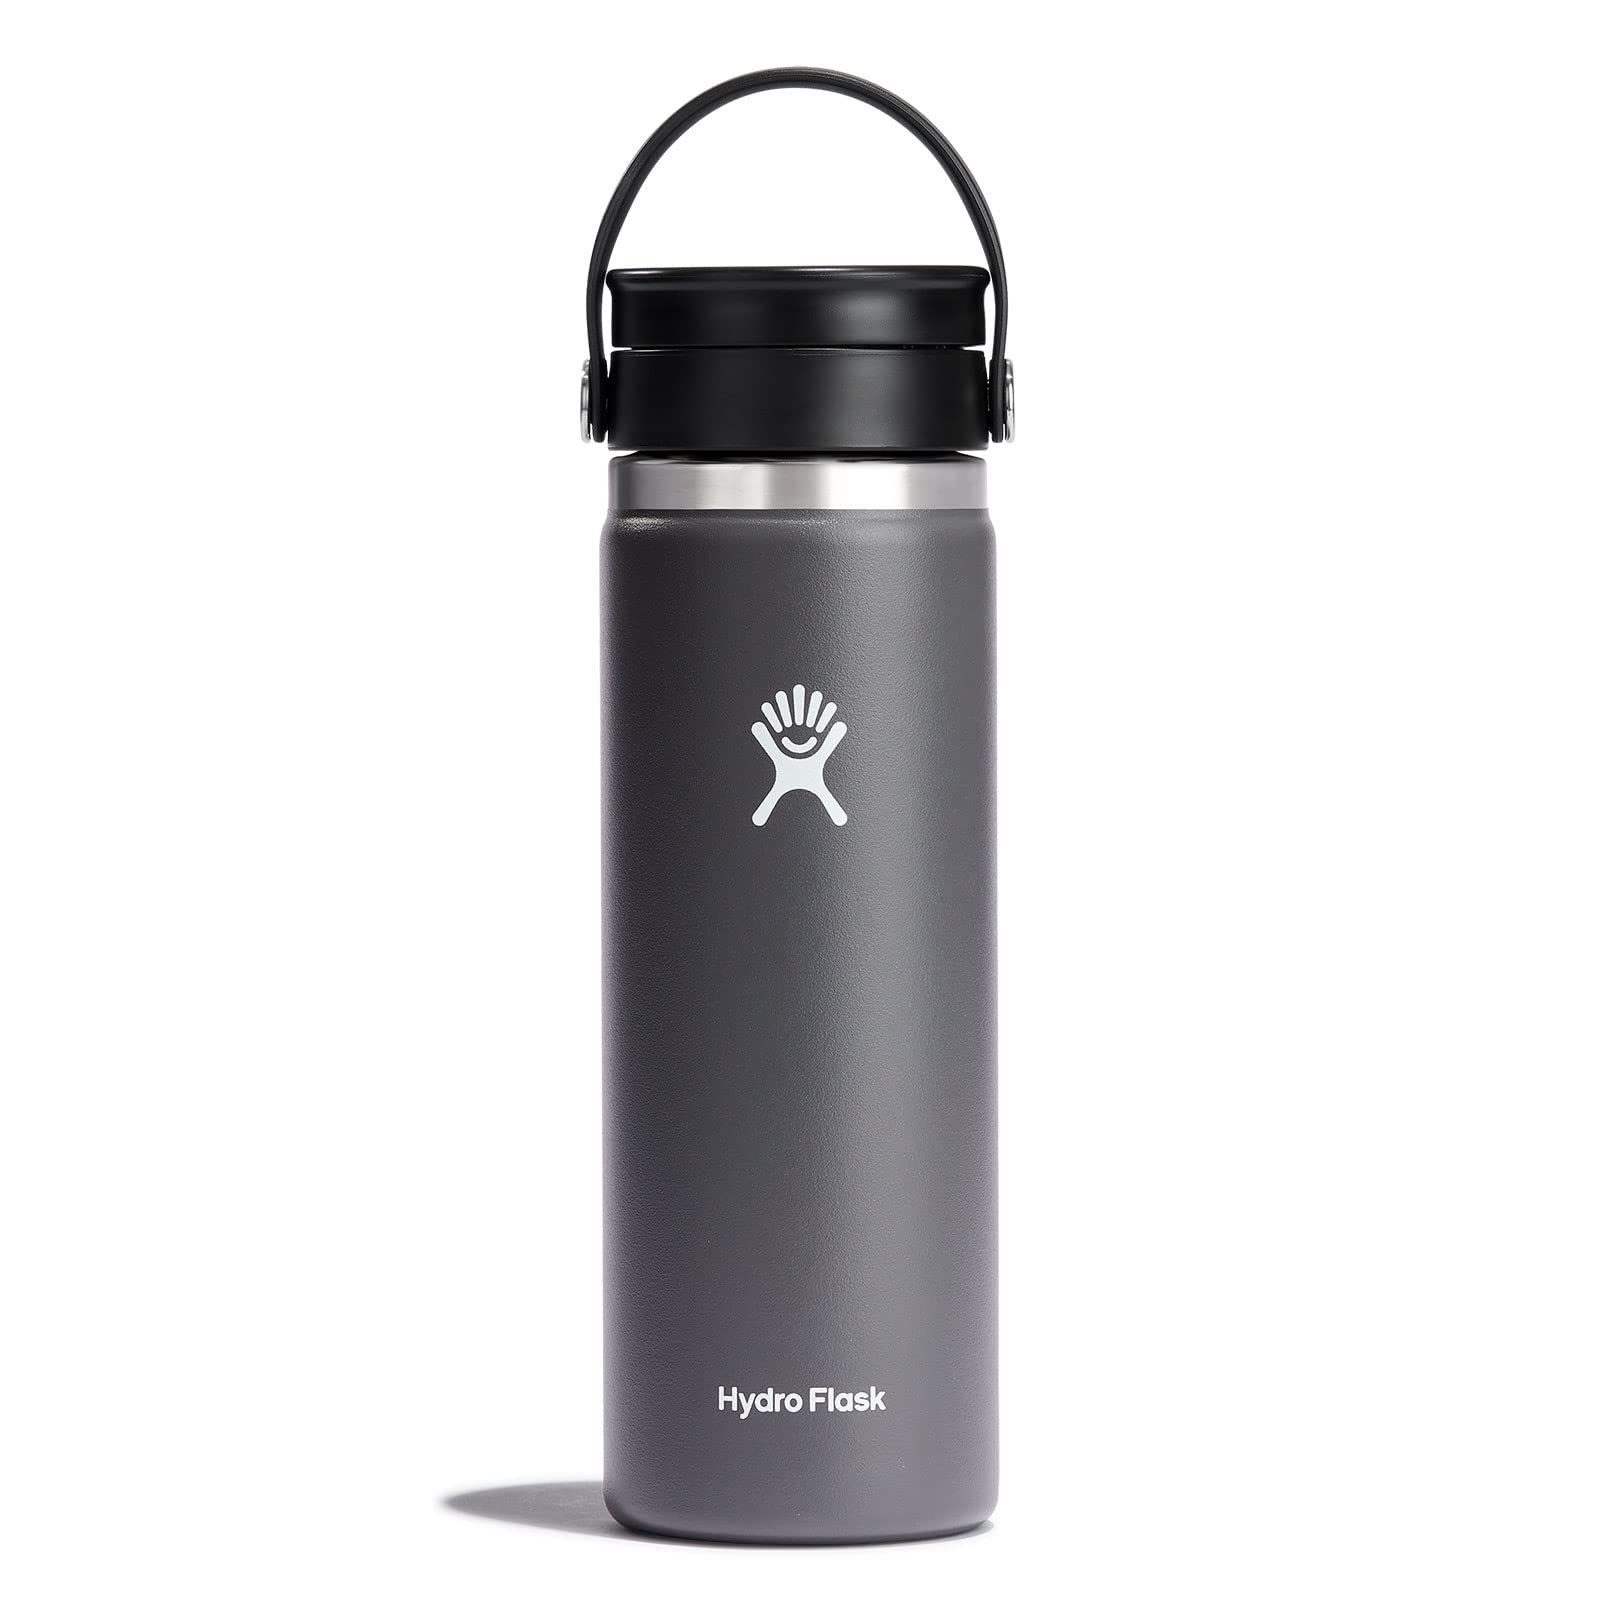 20-Ounce Hydro Flask Wide Mouth Bottle w/ Flex Sip Lid (Stone or Pacific) $16.96 + Free Shipping w/ Prime or on $35+